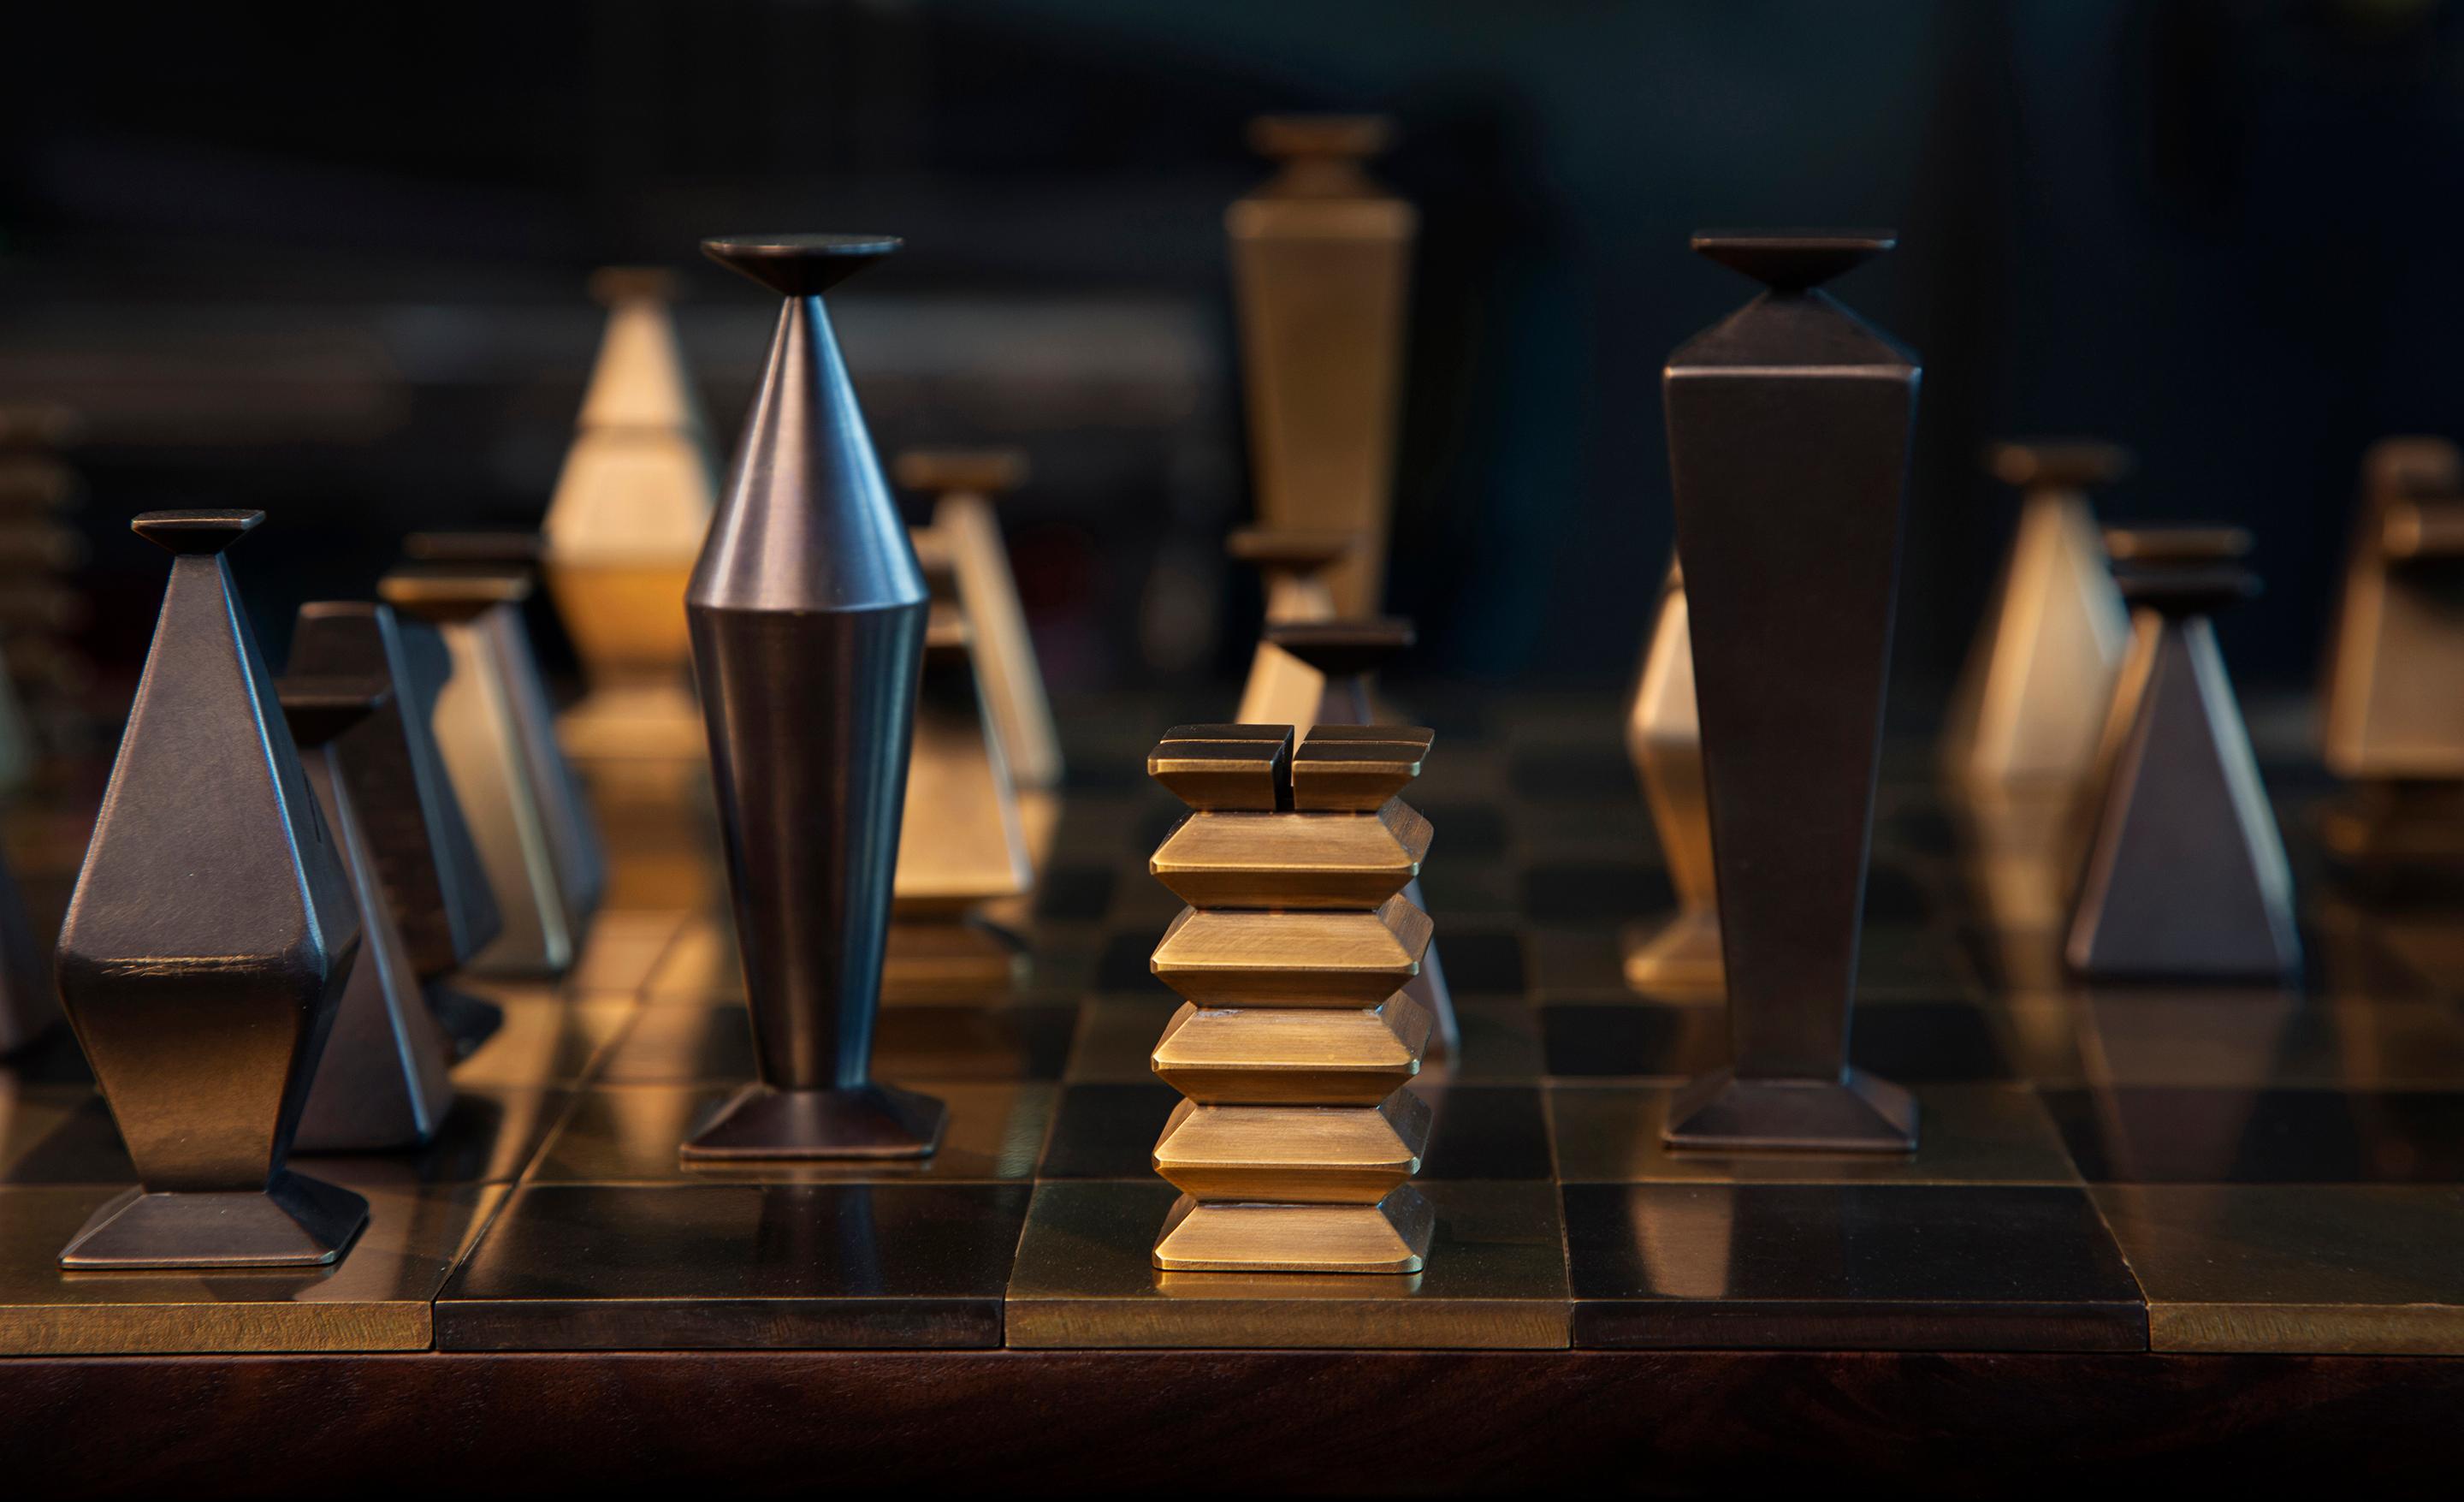 A special chess set in solid hand-patinated brass. Handcrafted in the North to order. Available in a range of materials and finishes, Otterburn can truly be customized and utterly unique with endless options and personalizations.

Dimensions: 
The